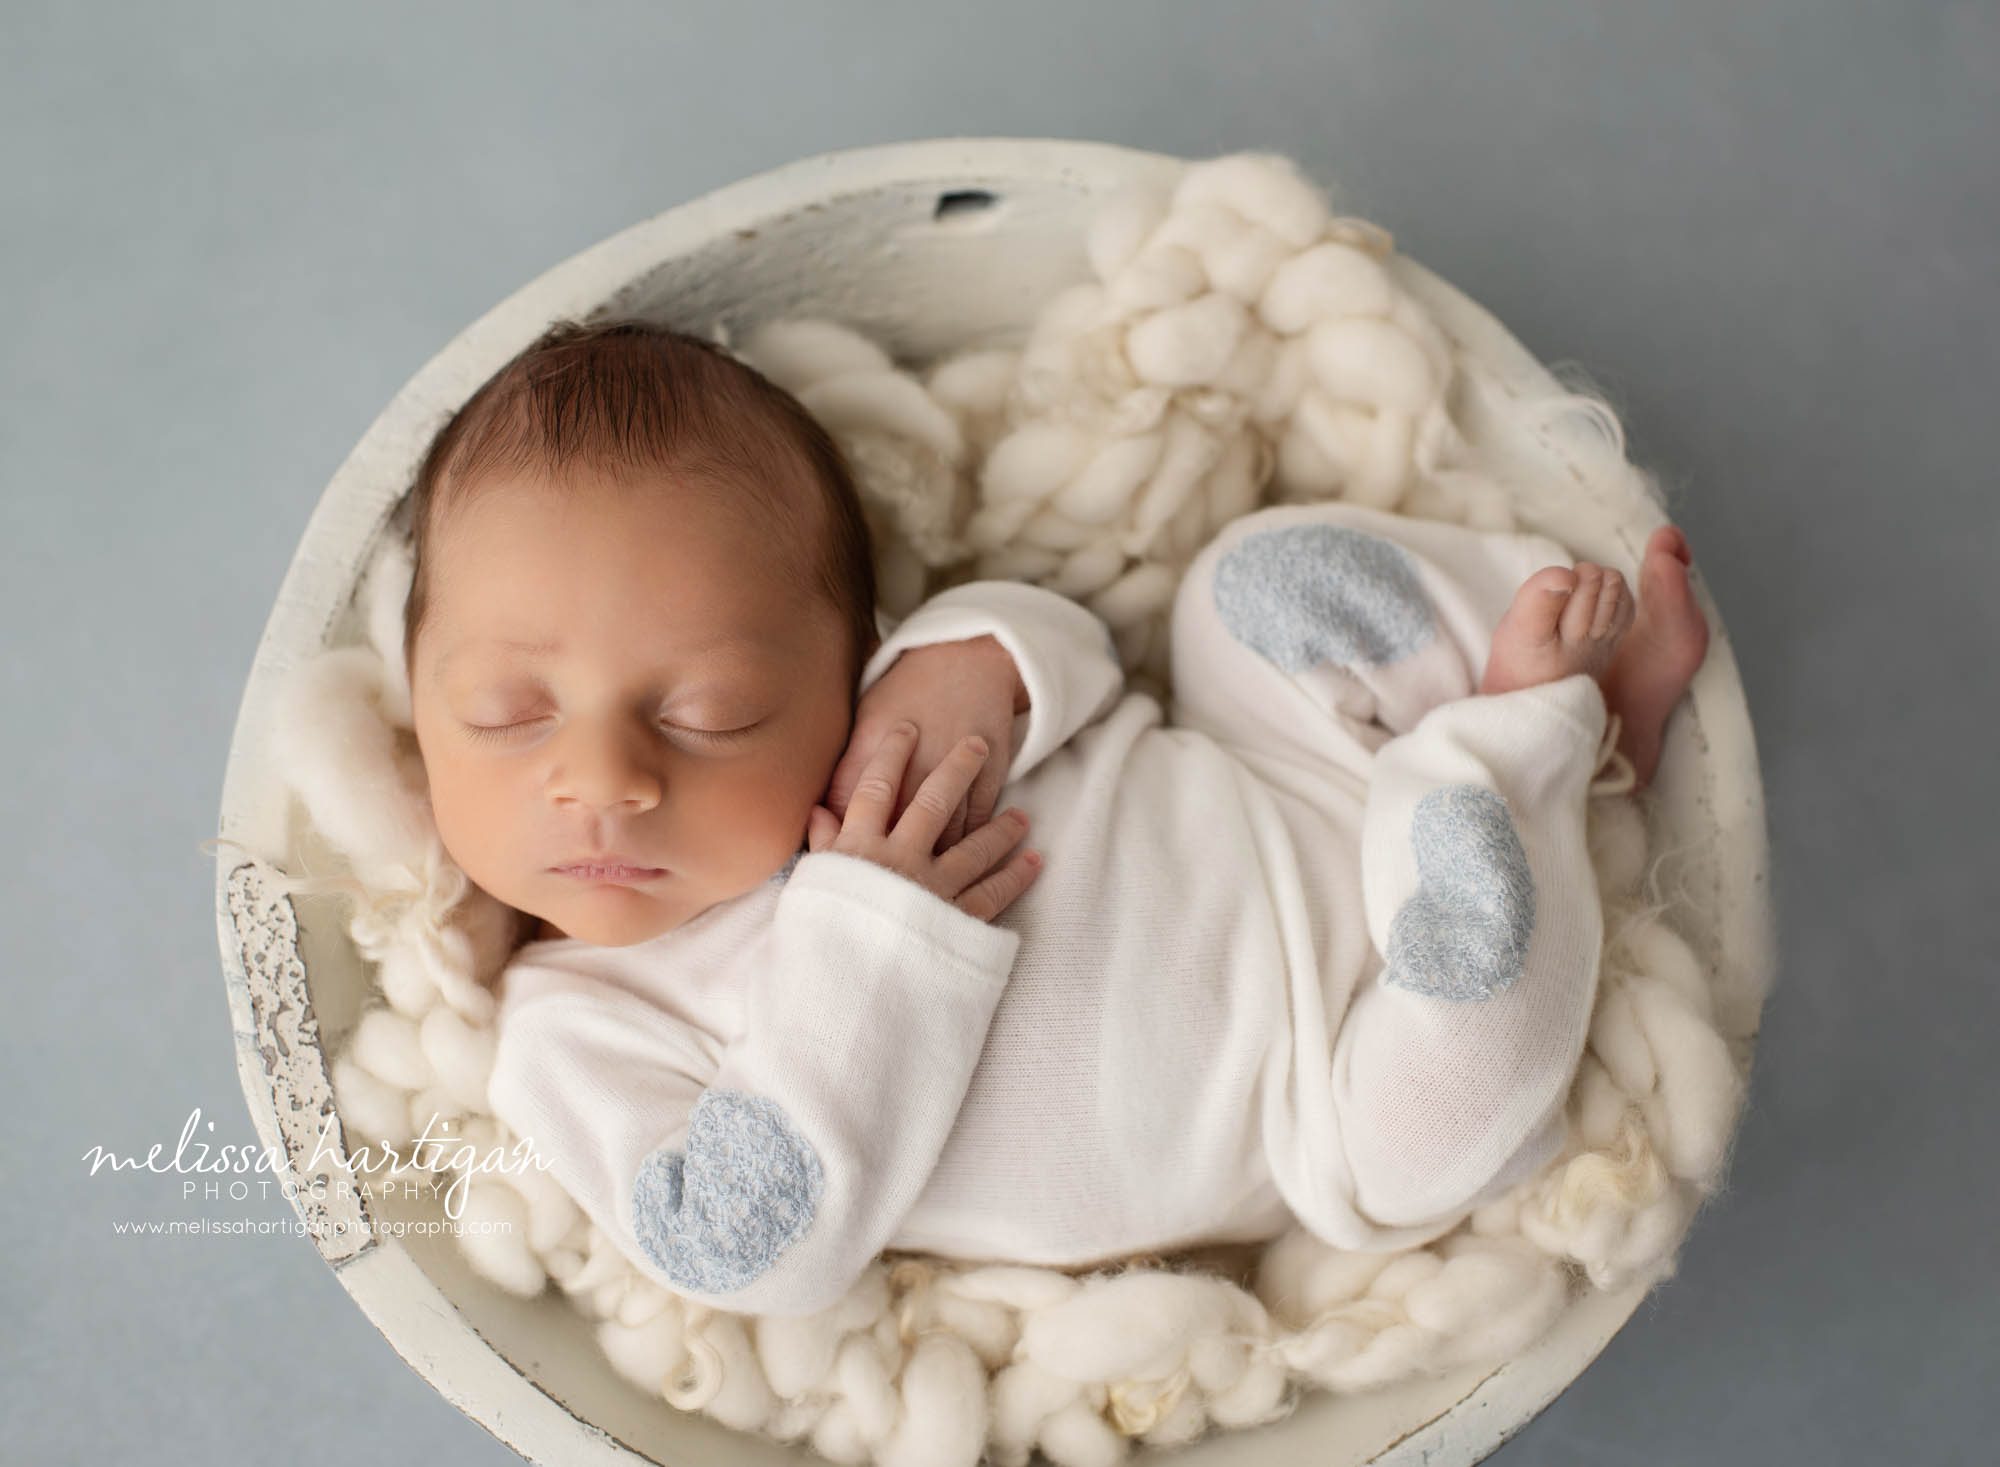 newborn baby boy posed cream bowl wearing cream colored outfit with blue patches on it